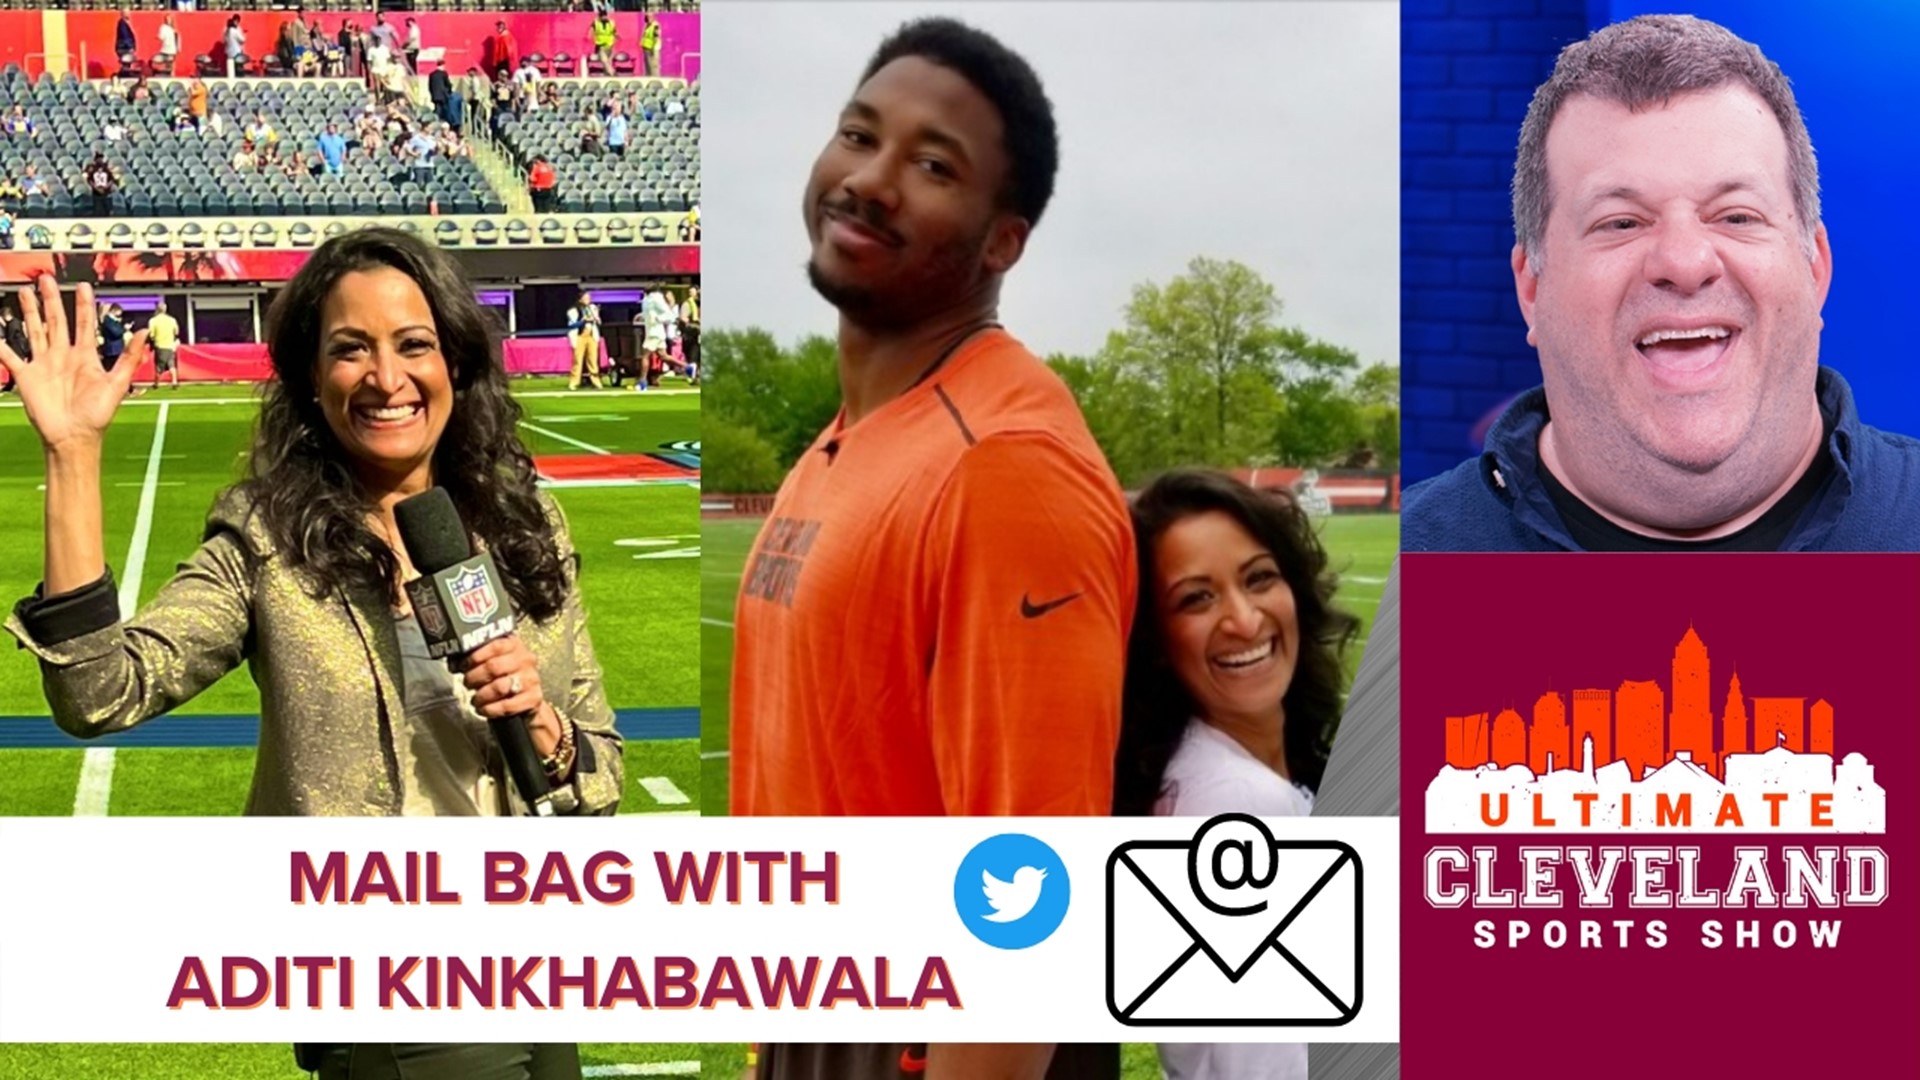 Aditi Kinkhabwala joins UCSS to discuss whether Baker Mayfield is a selfish quarterback.